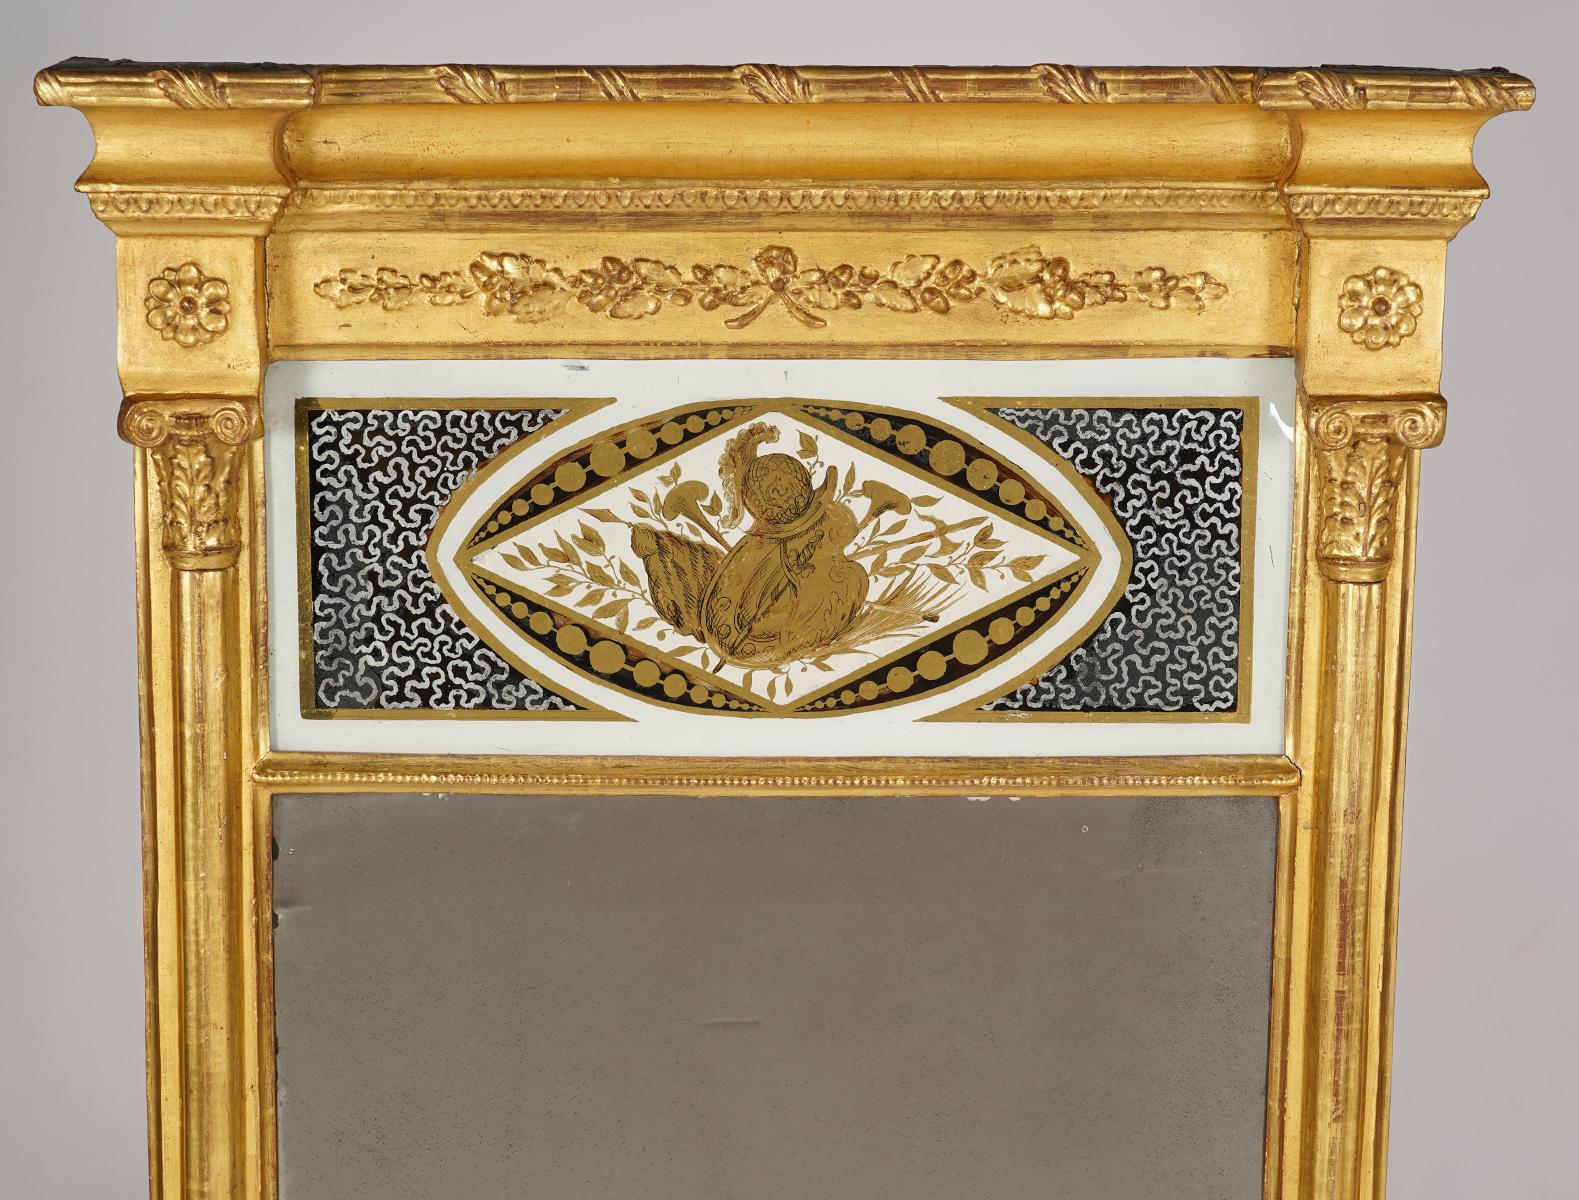 This Federal period giltwood pier mirror, dating to circa 1820, is designed in the architectural style. It features an elegant projecting crest molding with applied classical ornaments and rosettes above an églomisé panel with a classical motif.